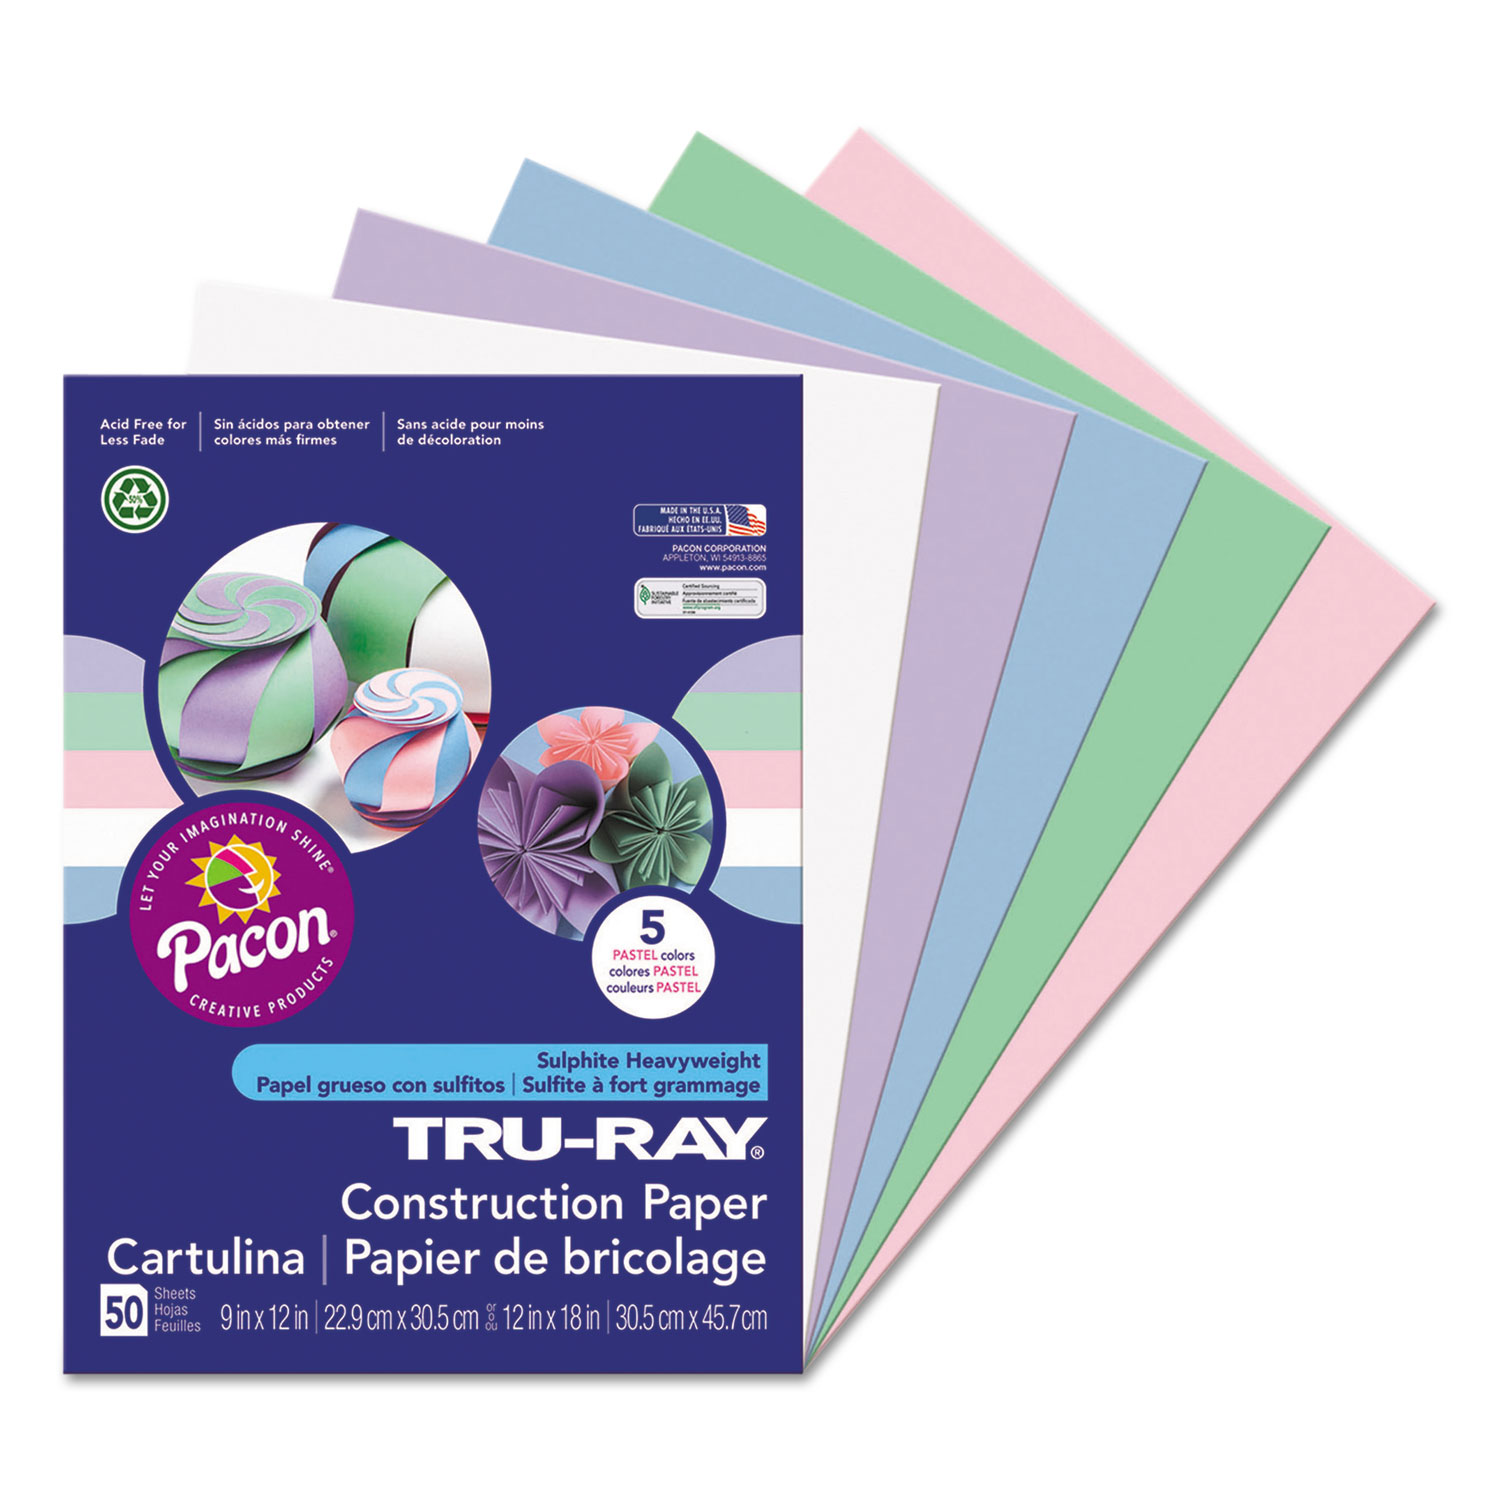  Pacon PAC6568 Tru-Ray Construction Paper, 76lb, 9 x 12, Assorted Pastel Colors, 50/Pack (PAC6568) 